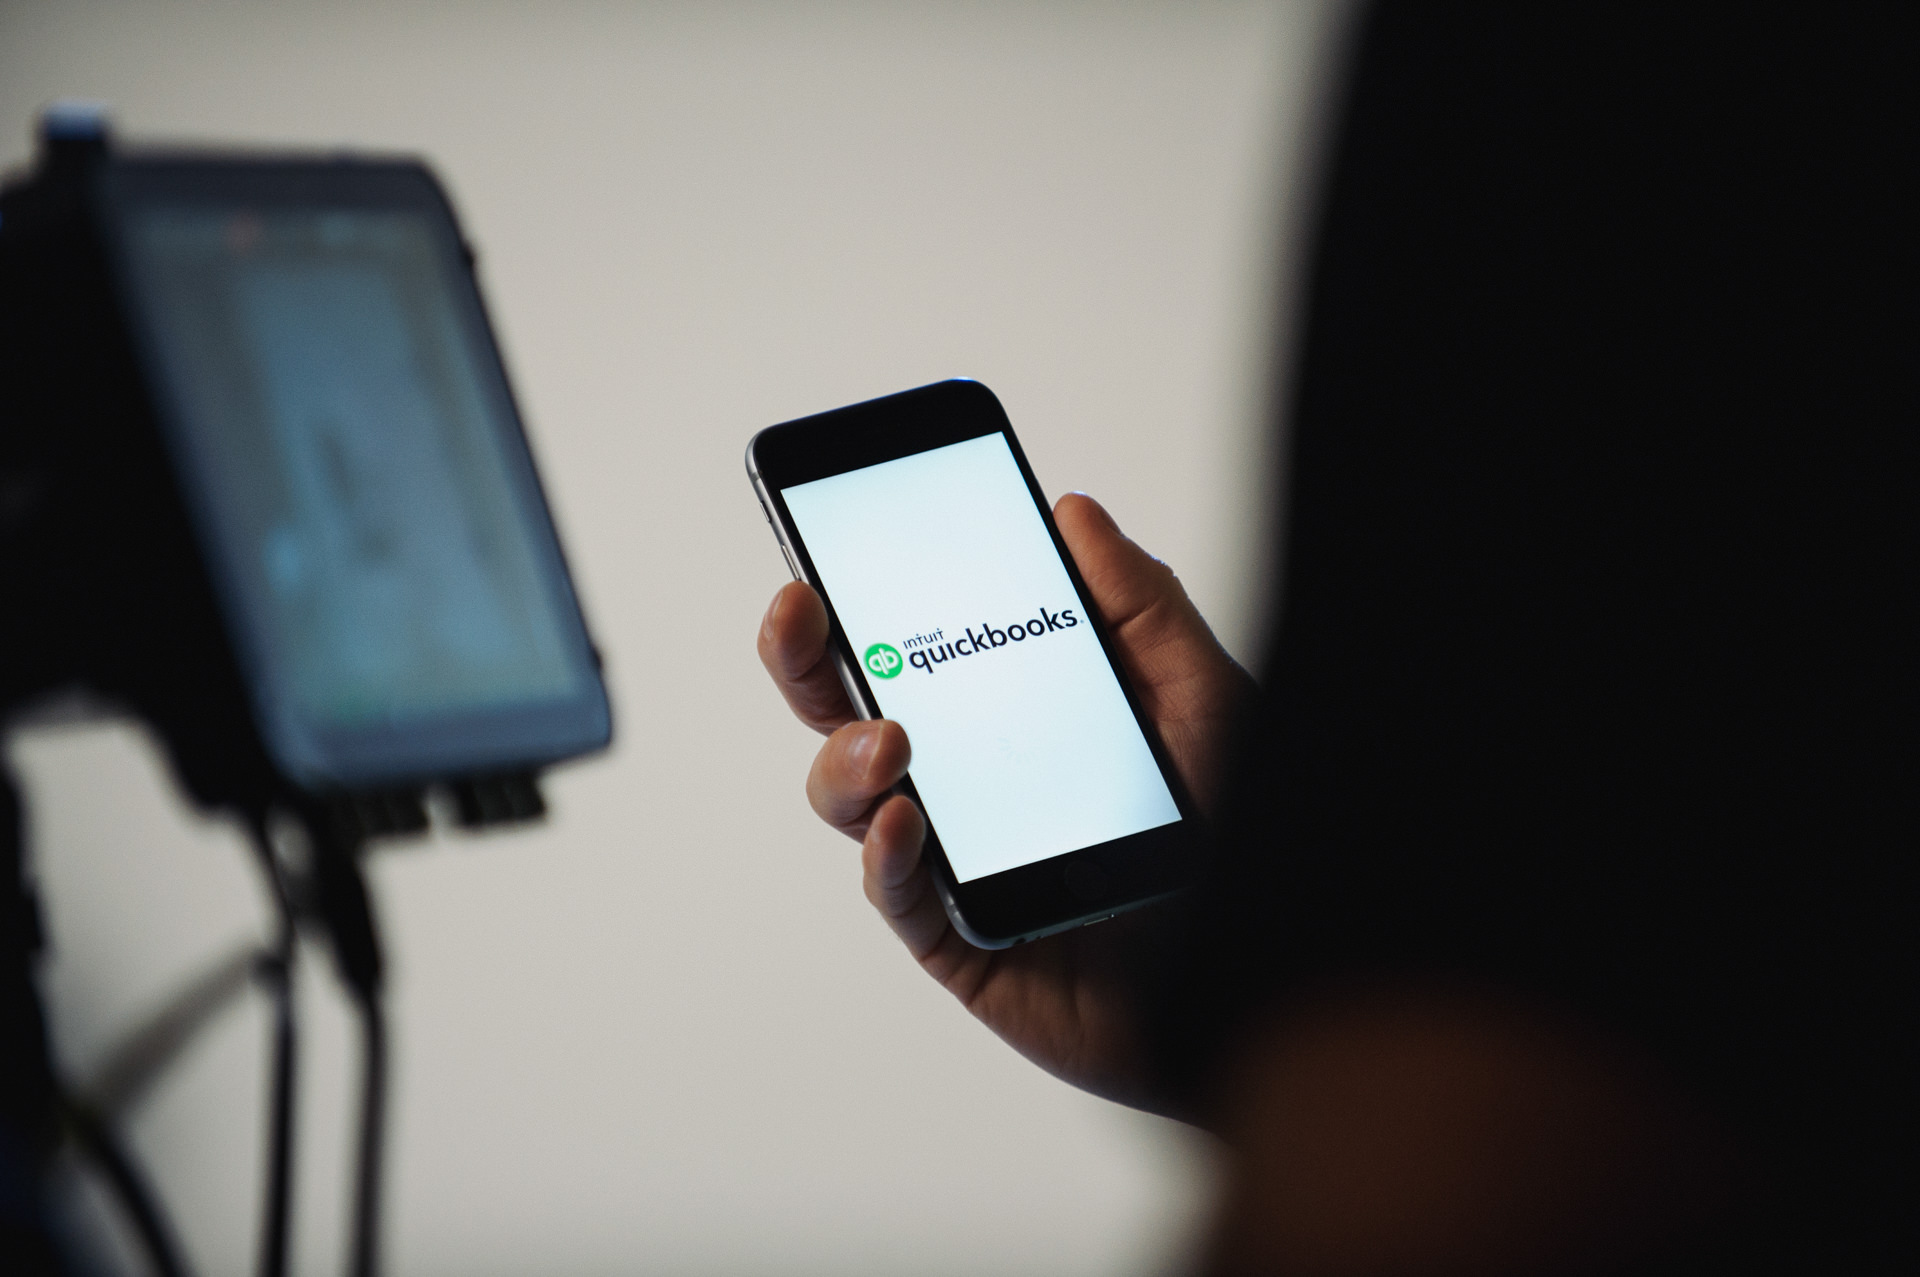 quickbooks app on a mobile screen